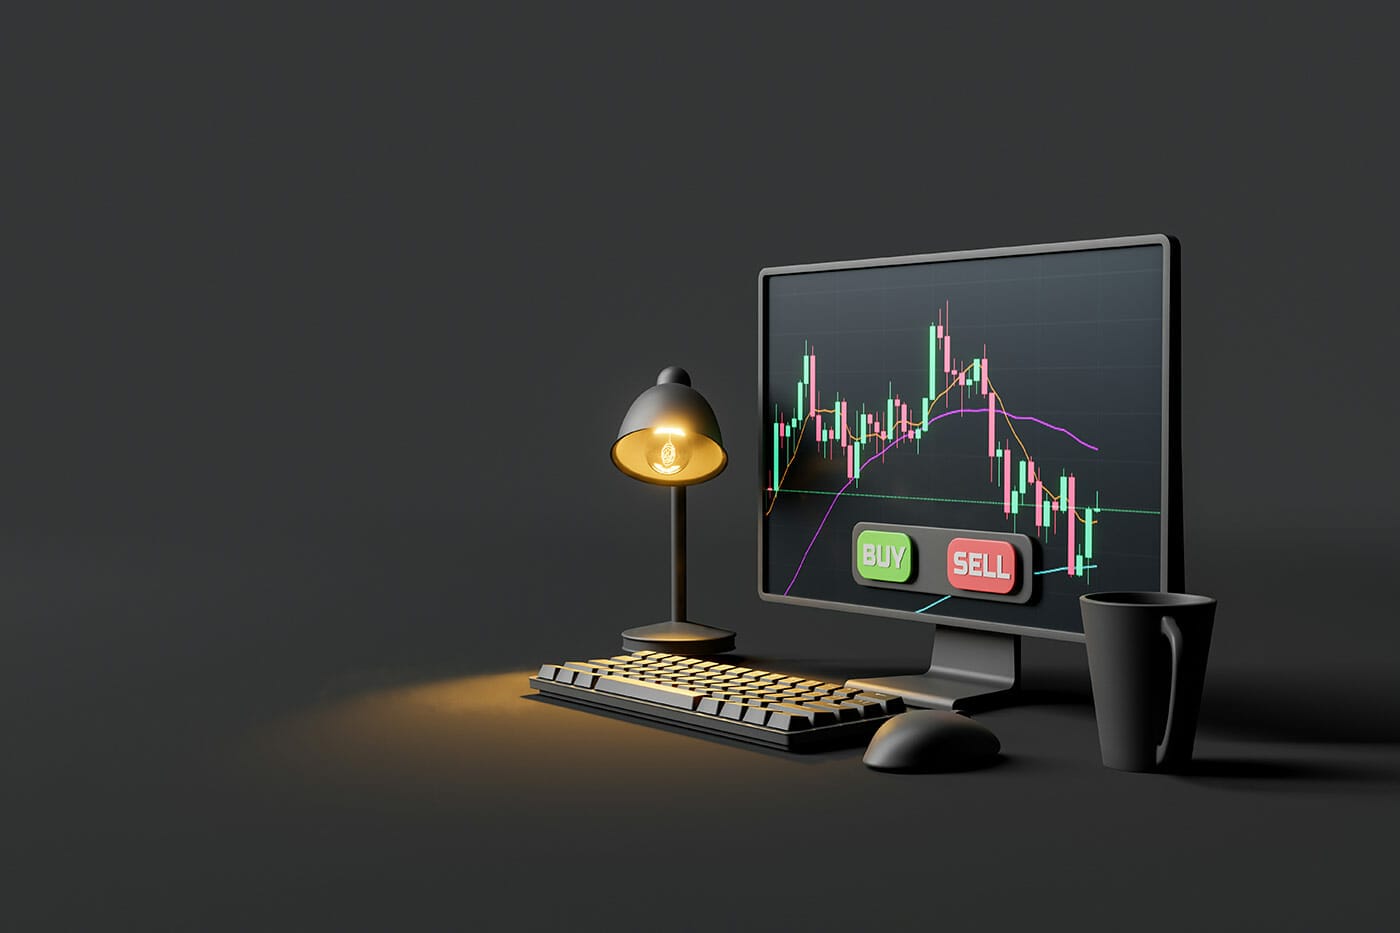 Black computer with green buy red sell buttons and candlestick graphs for investing